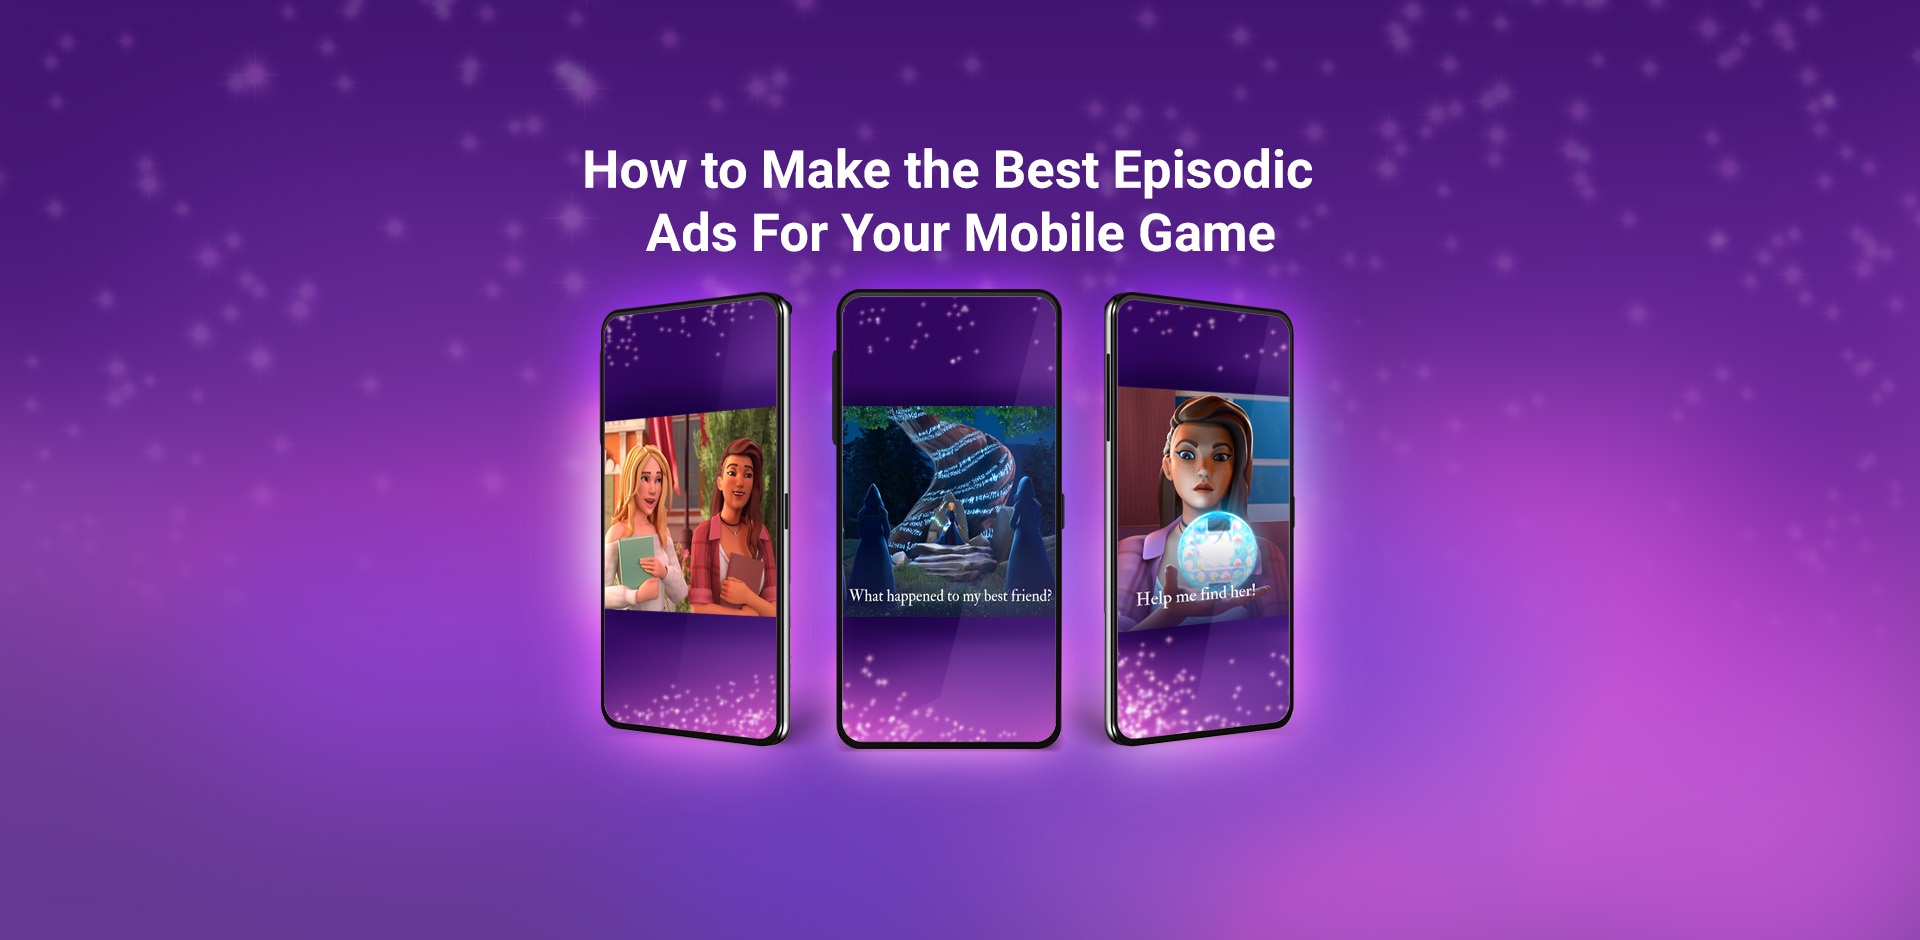 How to Make the Best Episodic Ads for Your Mobile Game